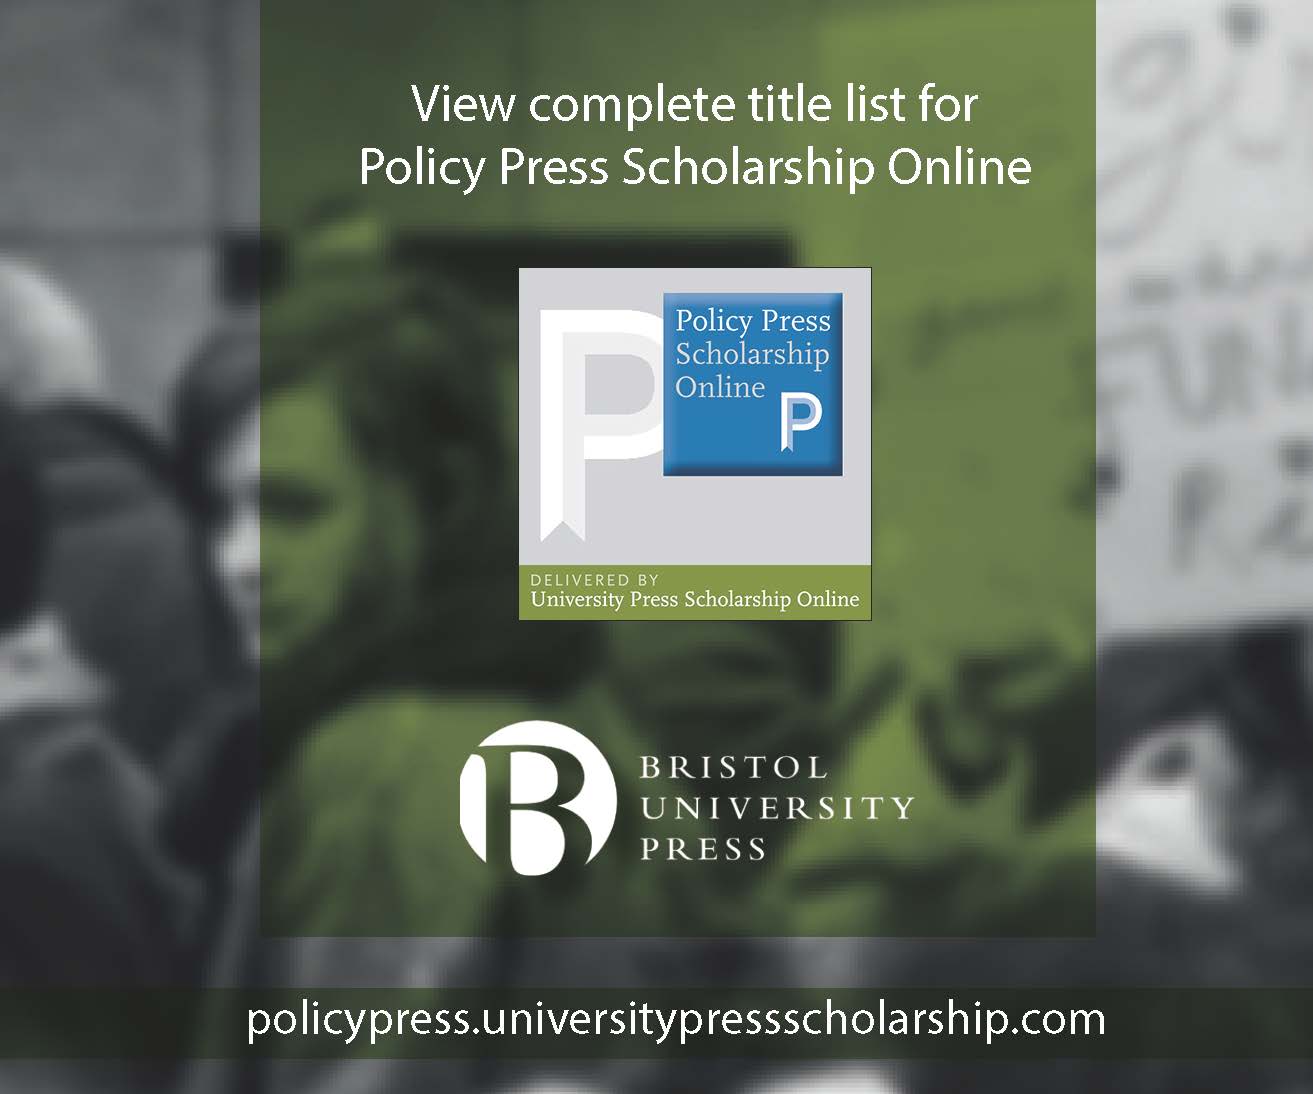 New Policy Press Scholarship Online Upload